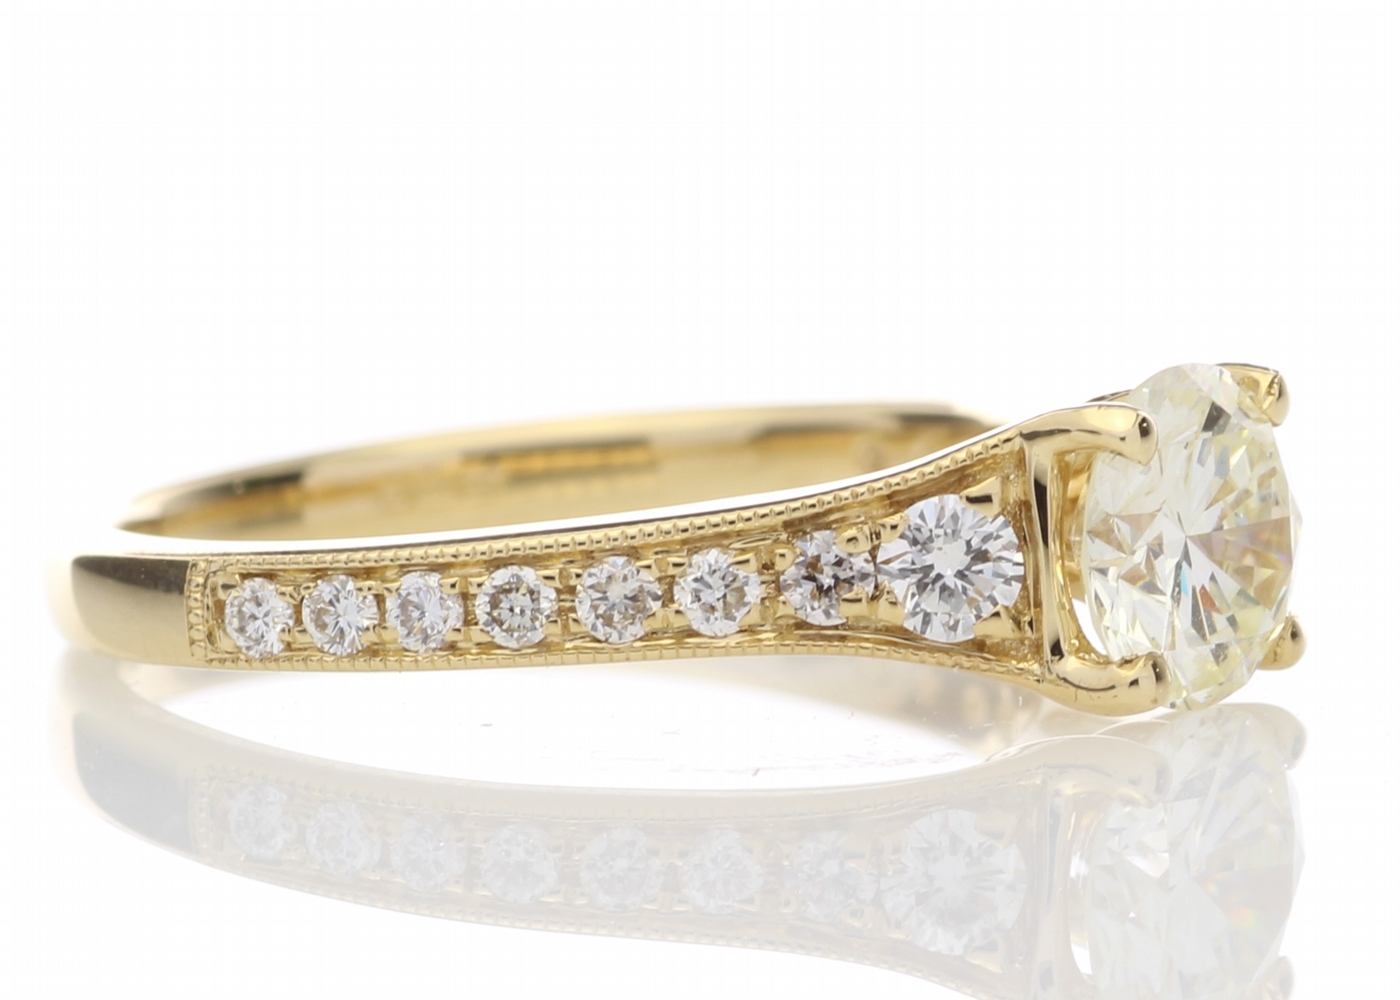 18ct Yellow Gold Diamond Ring With Stone Set Shoulders 1.06 Carats - Image 4 of 5